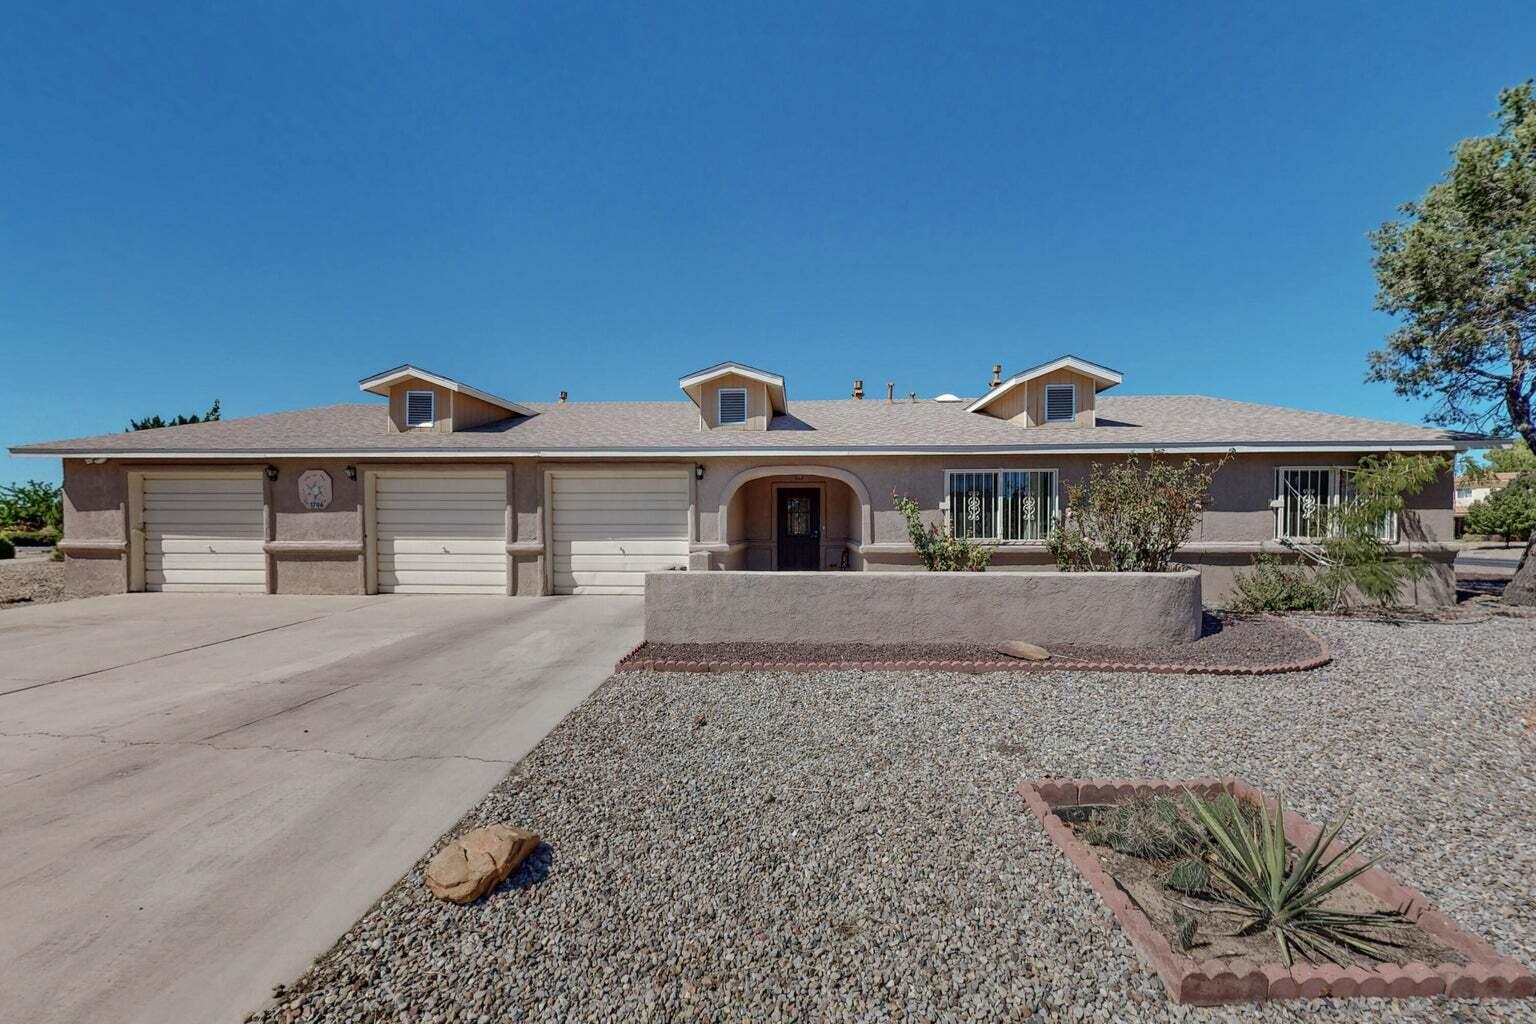 Don't miss this great home in a golf course community. Convenient to Highway 47, and just 15 minutes from Los Lunas. Spacious floorplan boasts 4 bedrooms and 2 baths. Open concept living area and kitchen is great for entertaining. Beautifully updated. Large primary bedroom is separate from the other bedrooms with walk-in closet and private access to the backyard. Primary bath with double vanity. Huge backyard and covered patio! 3 car garage, 1 bay is set up and ready for the auto mechanic in your family. Welcome home!